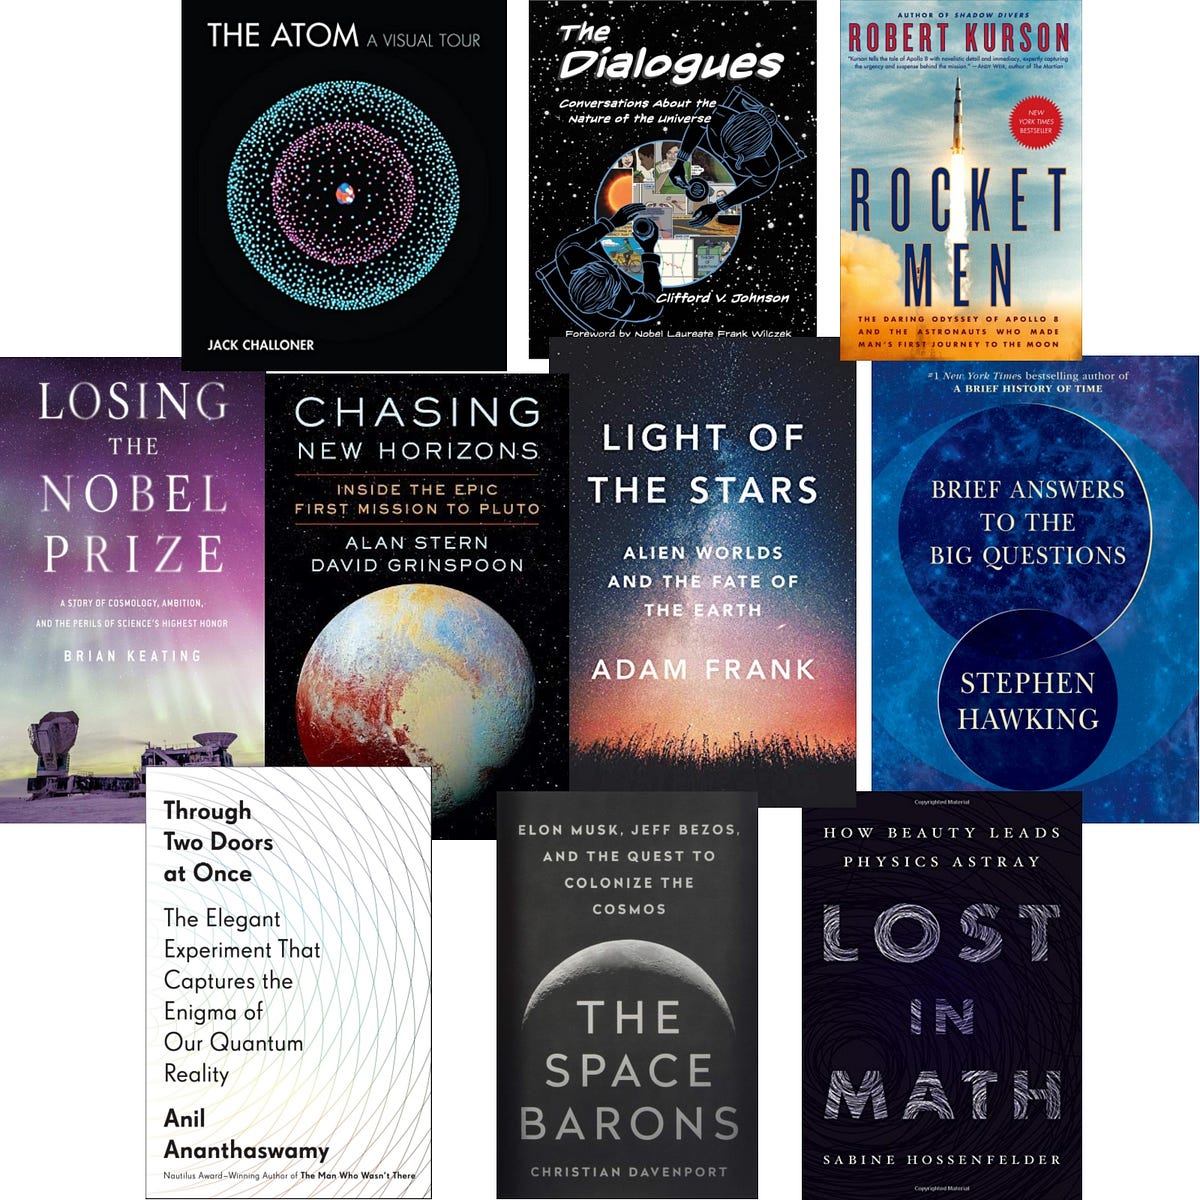 Ten Of The Best Books About Astronomy Physics And Mathematics Of 2018 By 𝐆𝐫𝐫𝐥𝐒𝐜𝐢𝐞𝐧𝐭𝐢𝐬𝐭 9583